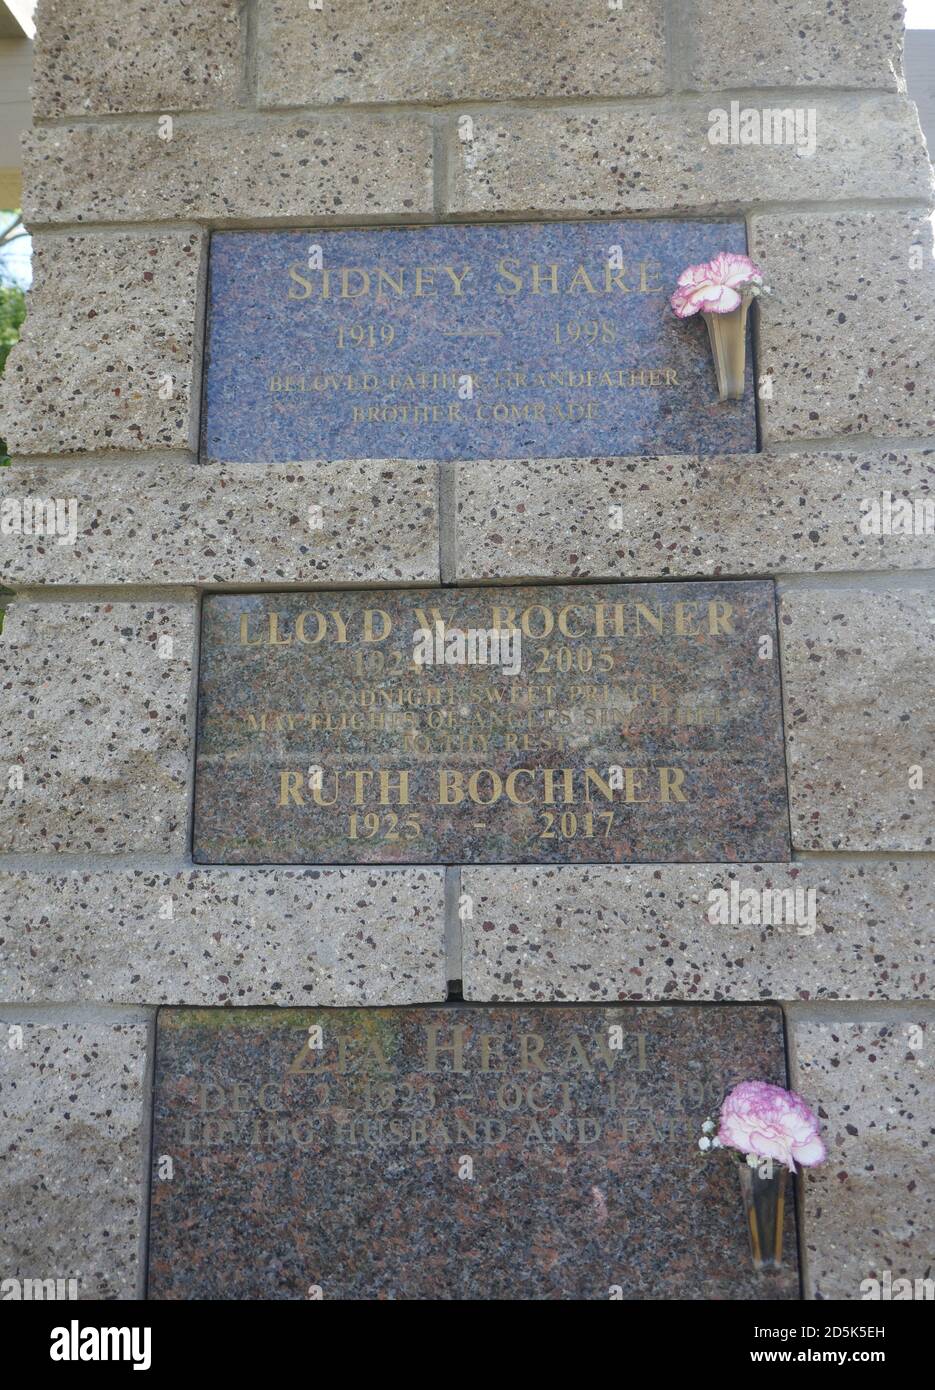 Los Angeles, California, USA 13th October 2020 A general view of atmosphere of actor Lloyd Bochner''s grave at Pierce Brothers Westwood Village Memorial Park on October 13, 2020 in Los Angeles, California, USA. Photo by Barry King/Alamy Stock Photo Stock Photo